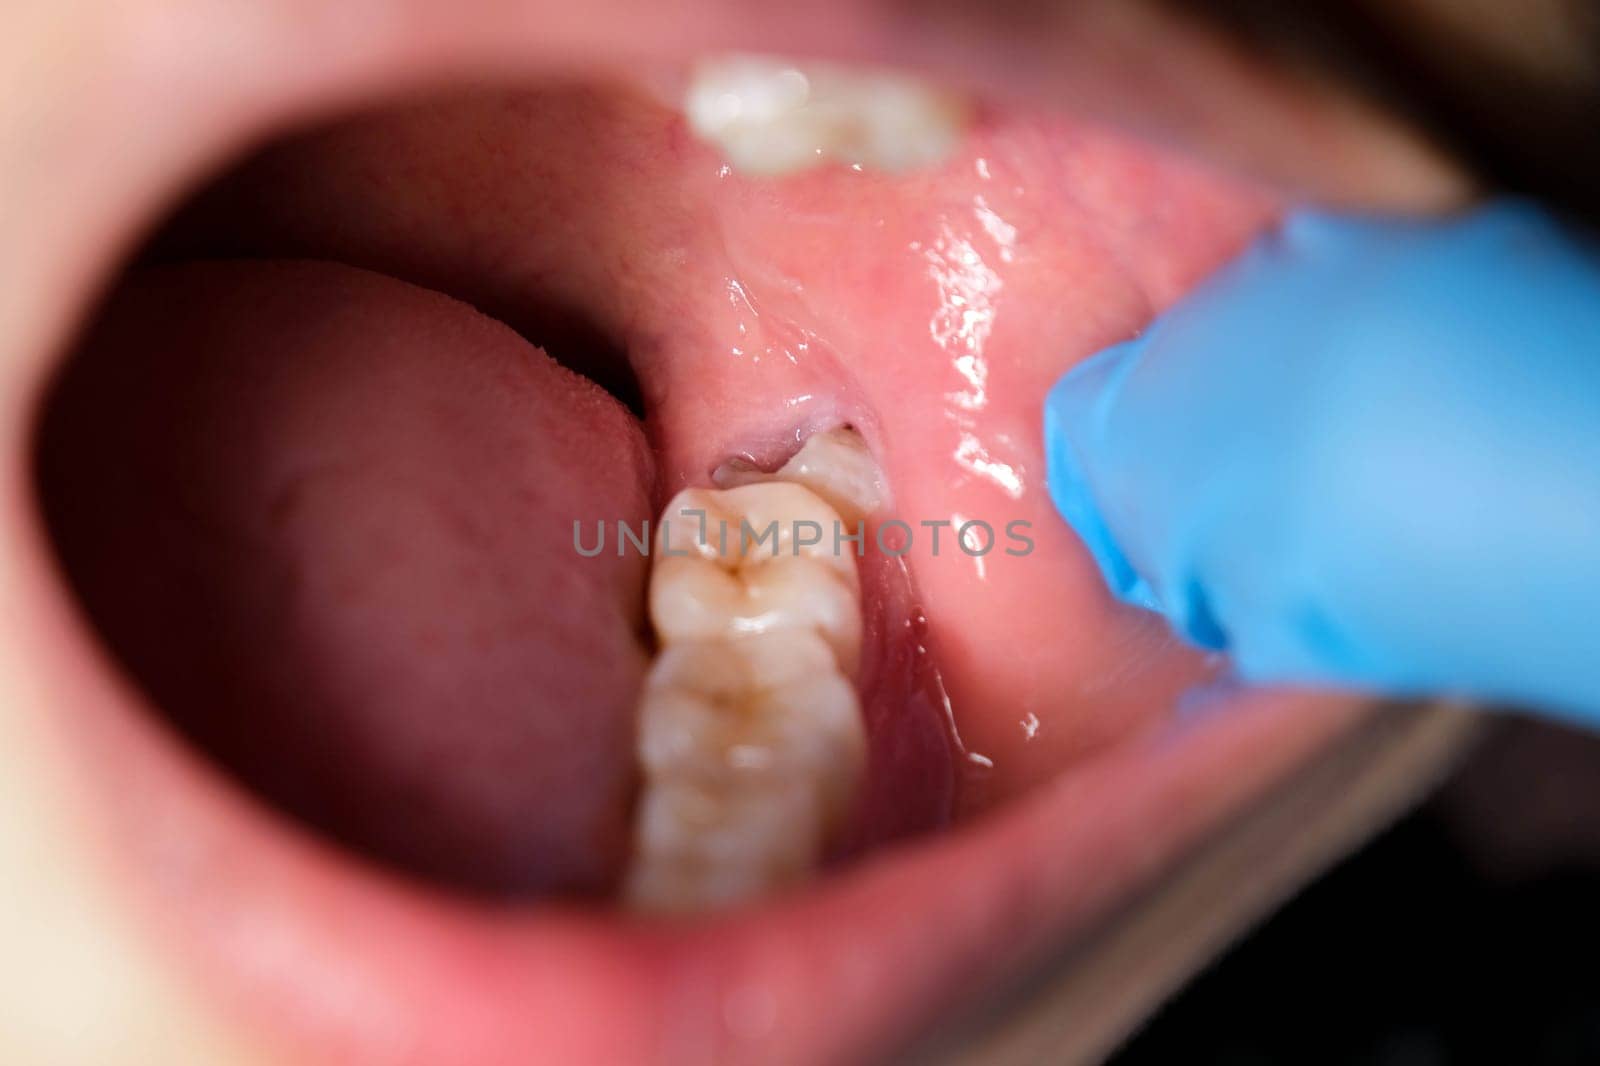 Wisdom teeth affect and cause gum recession. by TEERASAK